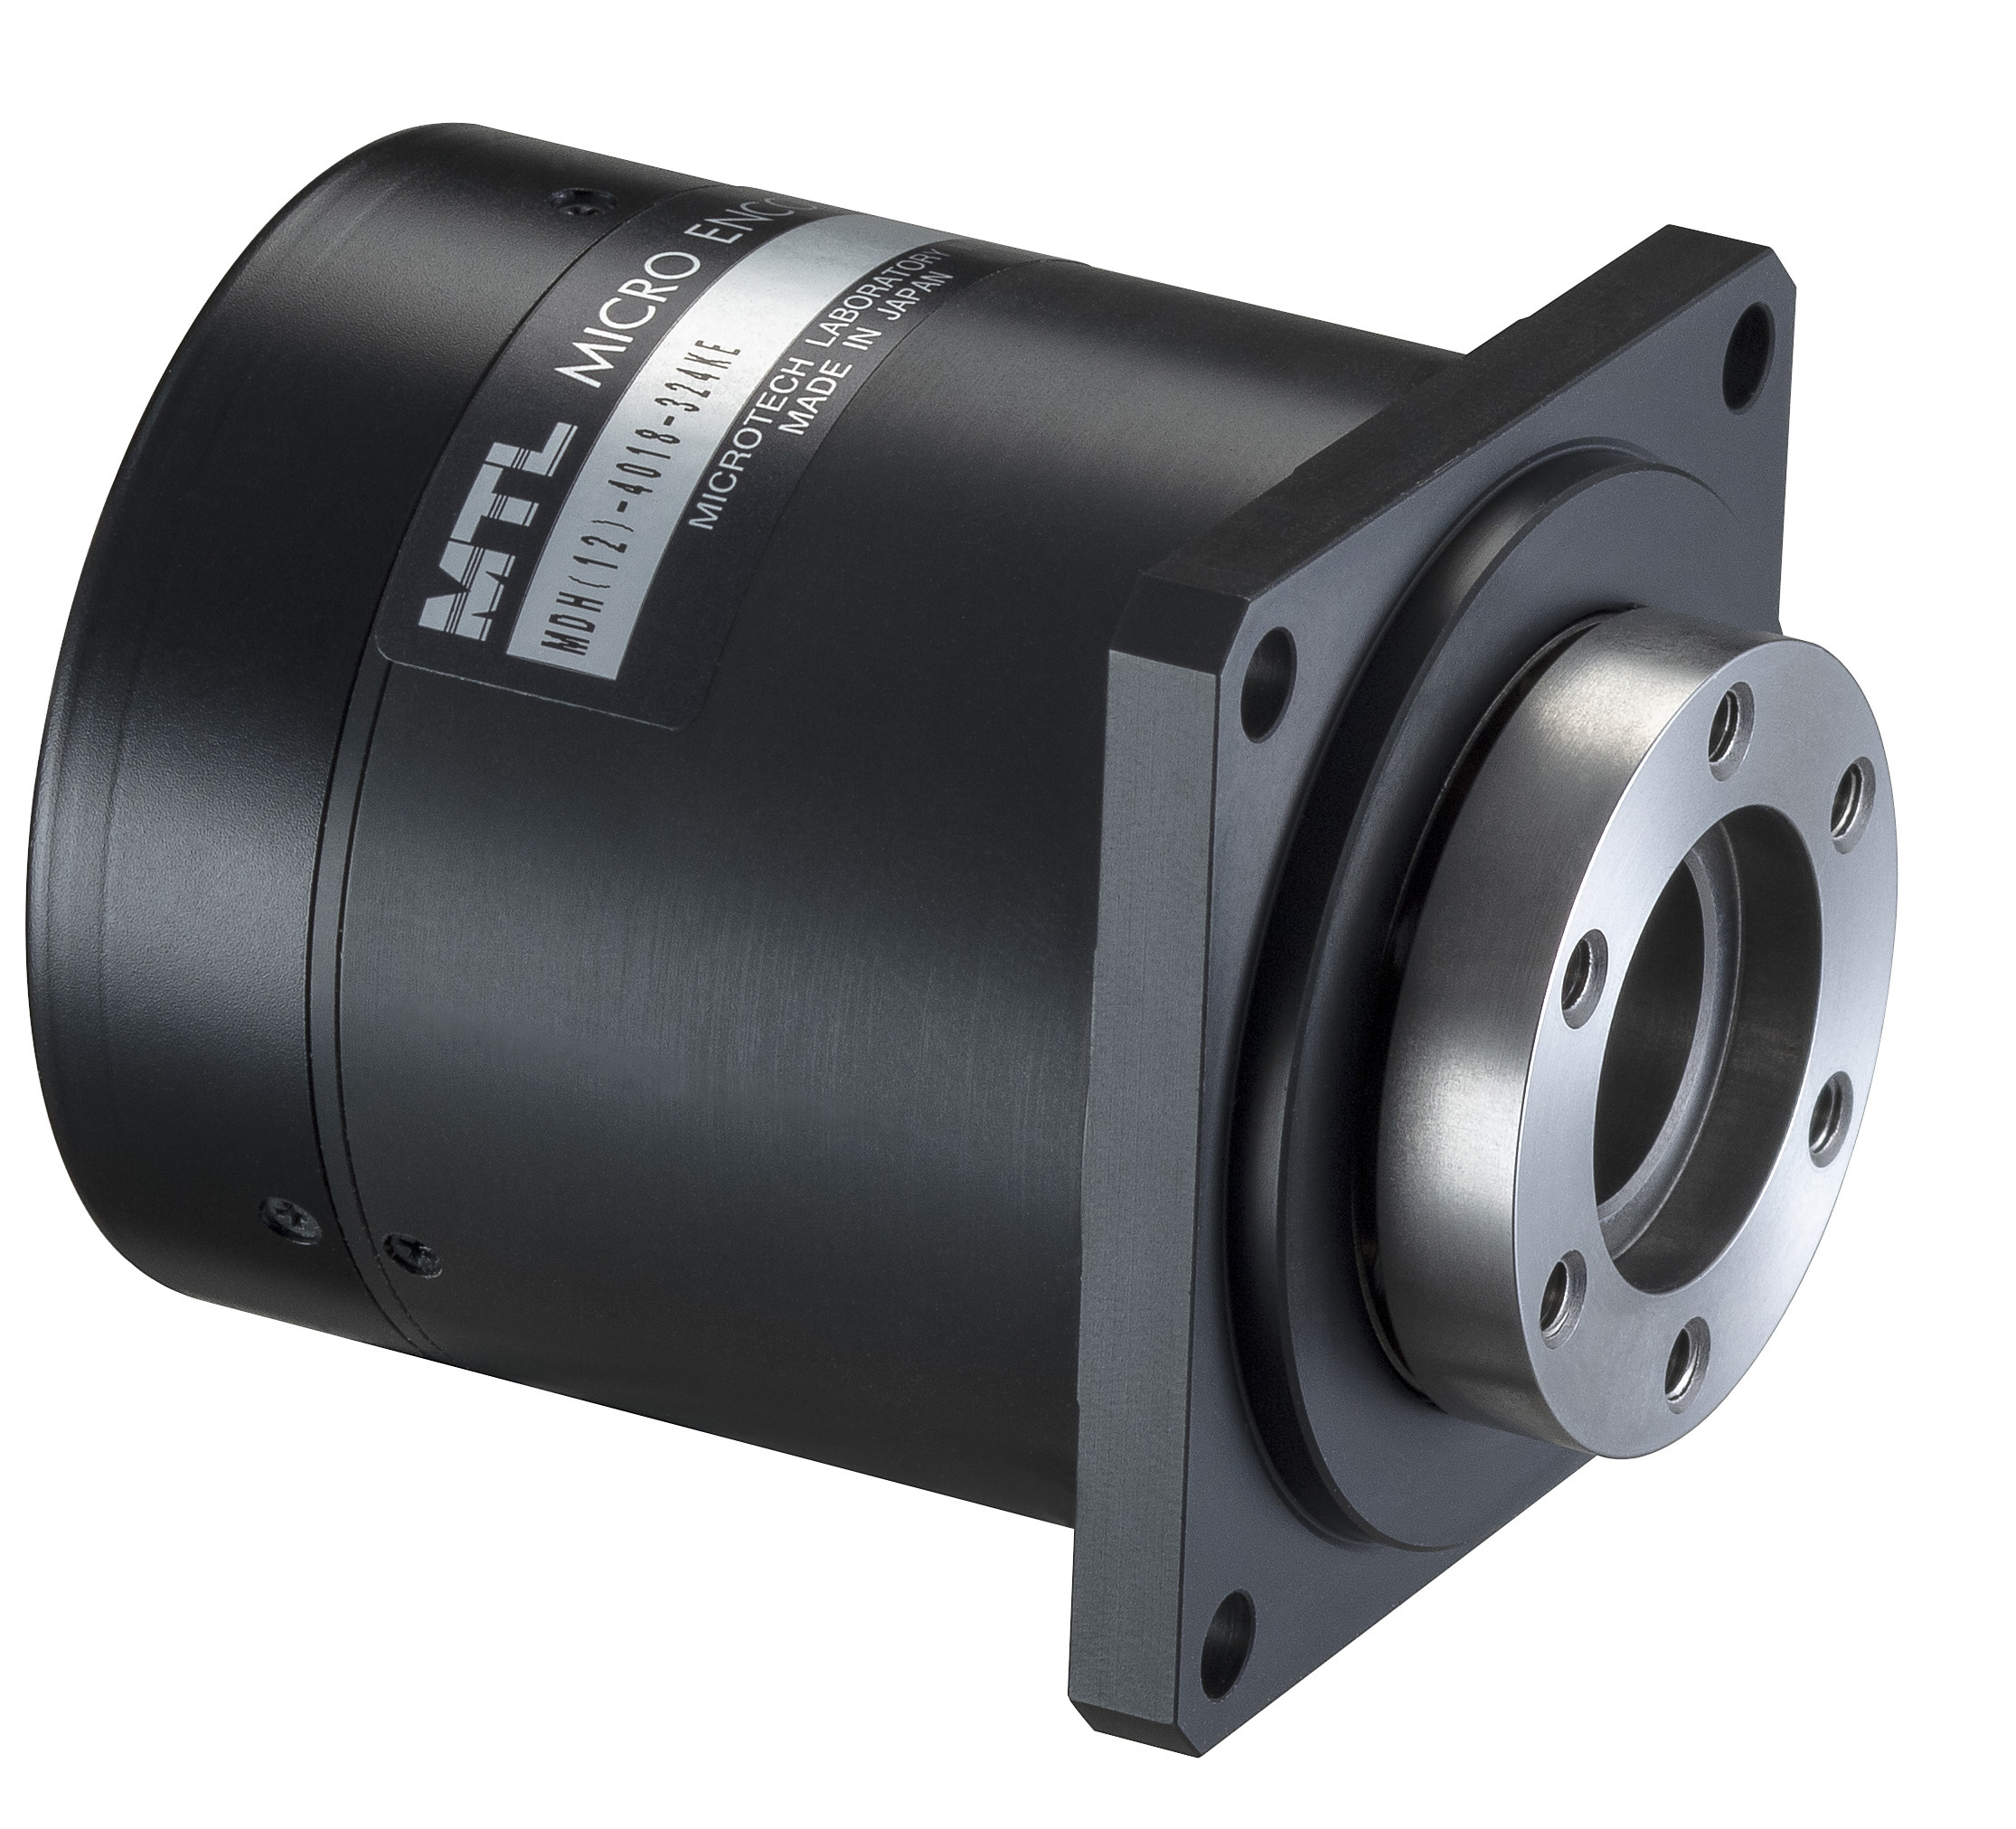 Nippon Pulse 40mm rotary servomotor with hollow shaft